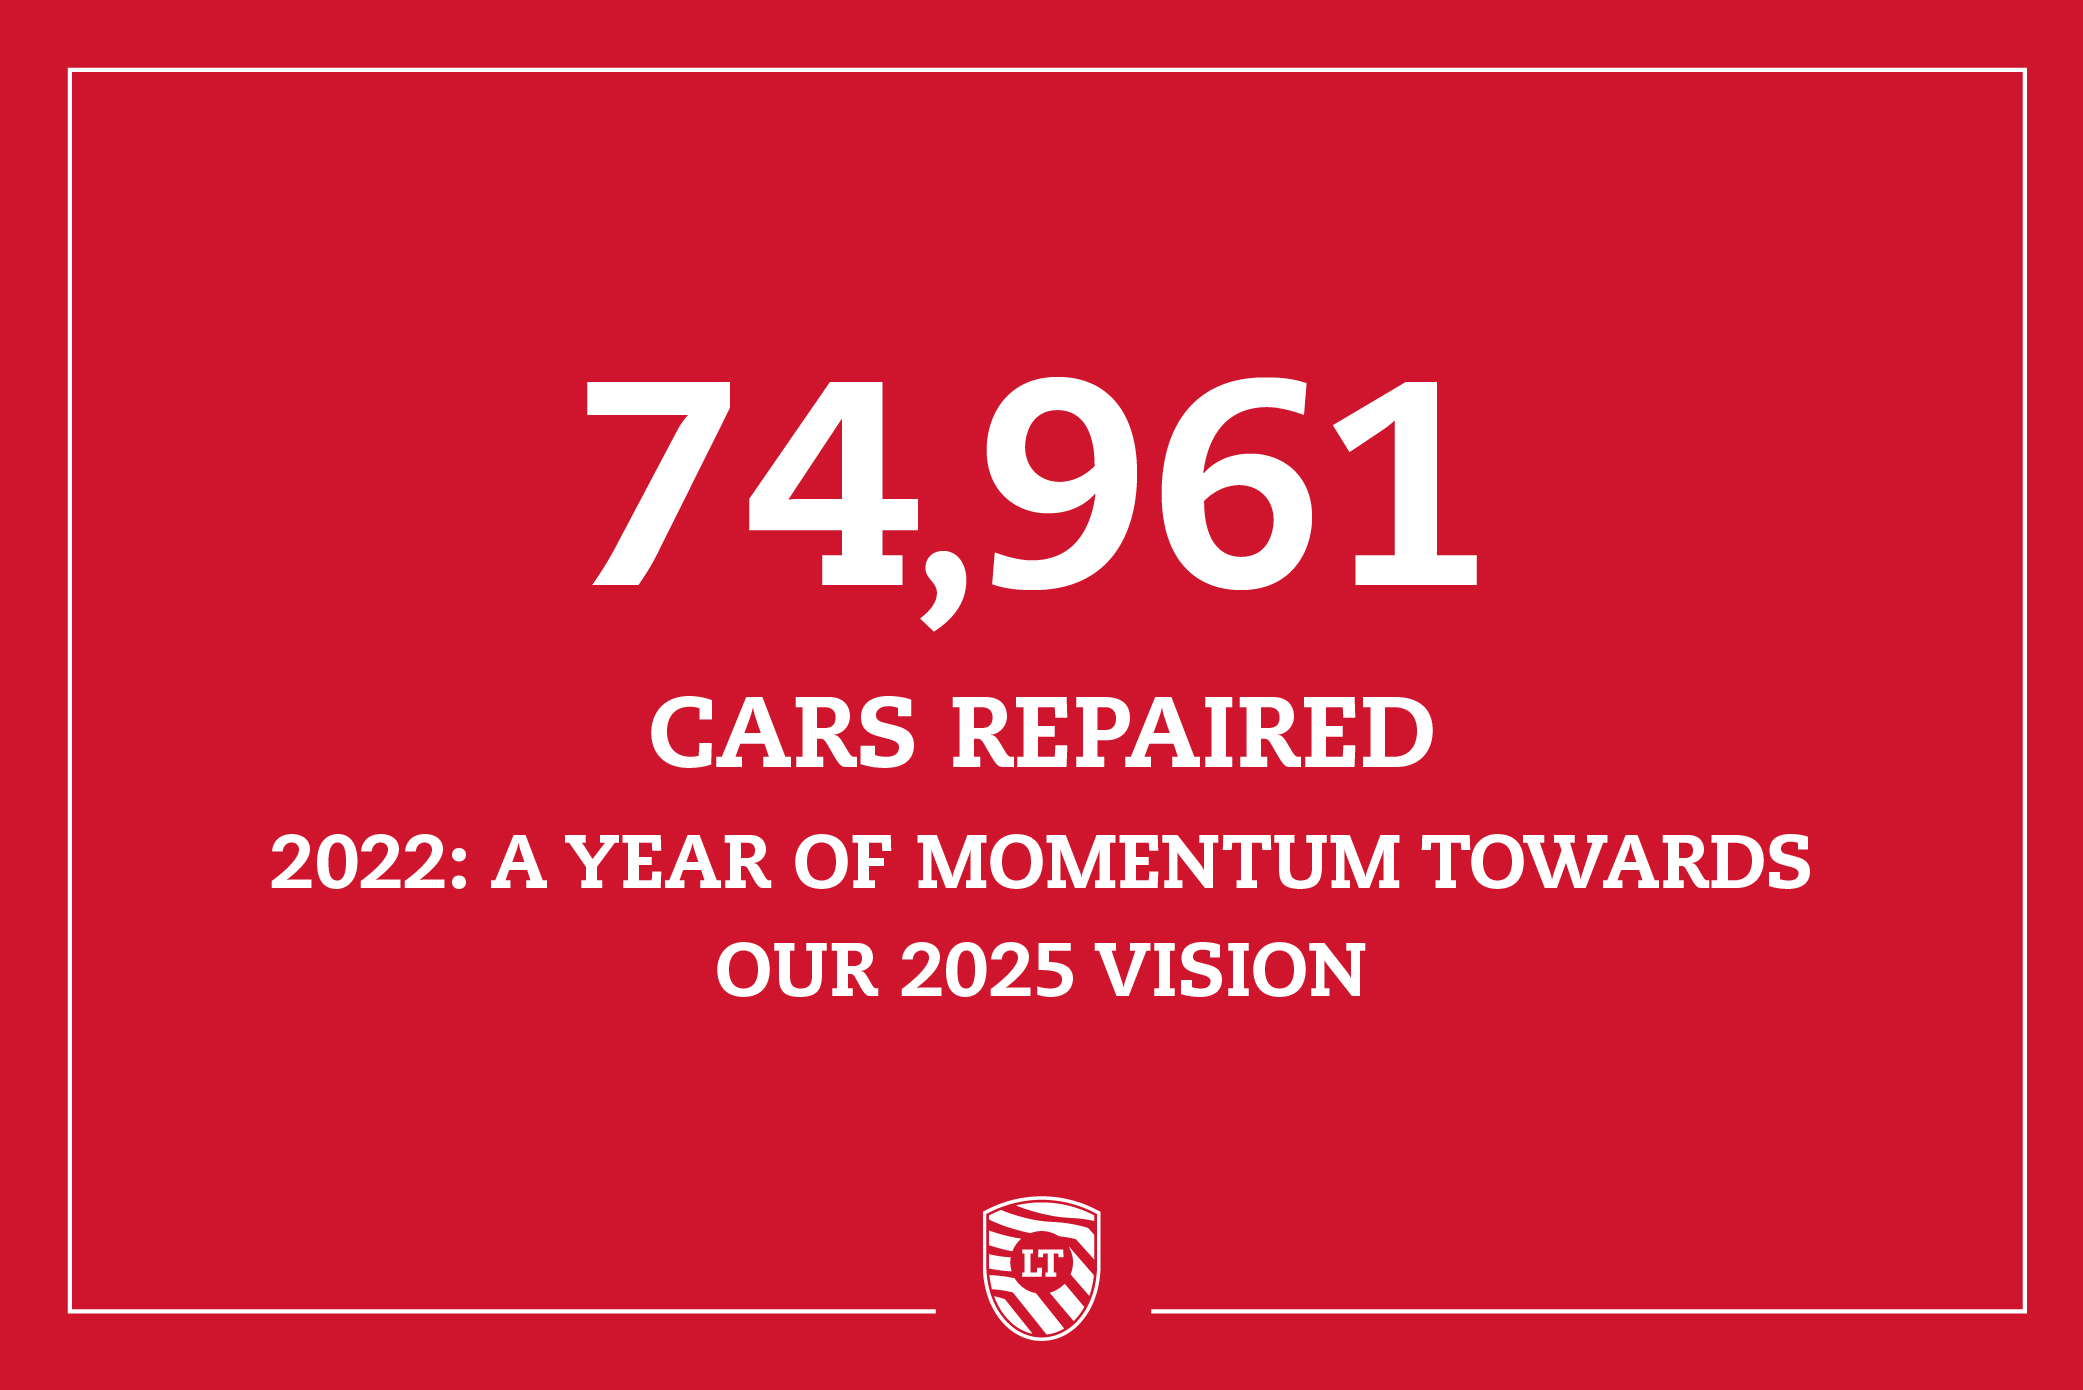 2022: a year of momentum towards our 2025 vision